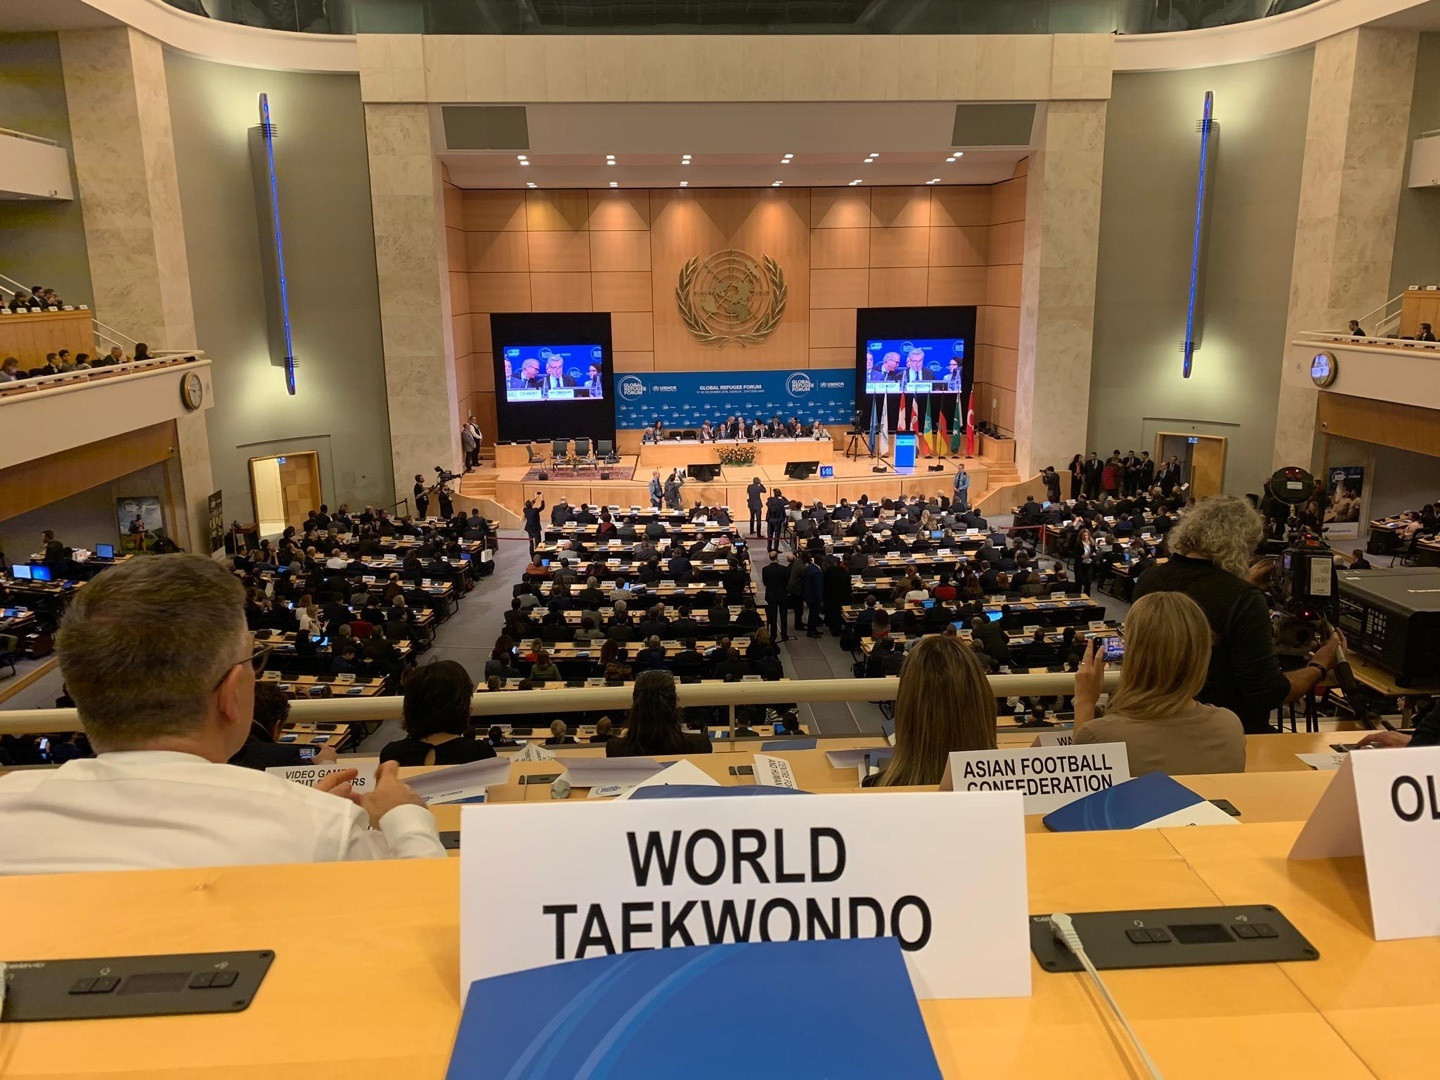 World Taekwondo was only one of two International Federations invited by the United Nations High Commissioner for Refugees to the Global Refugee Forum ©World Taekwondo